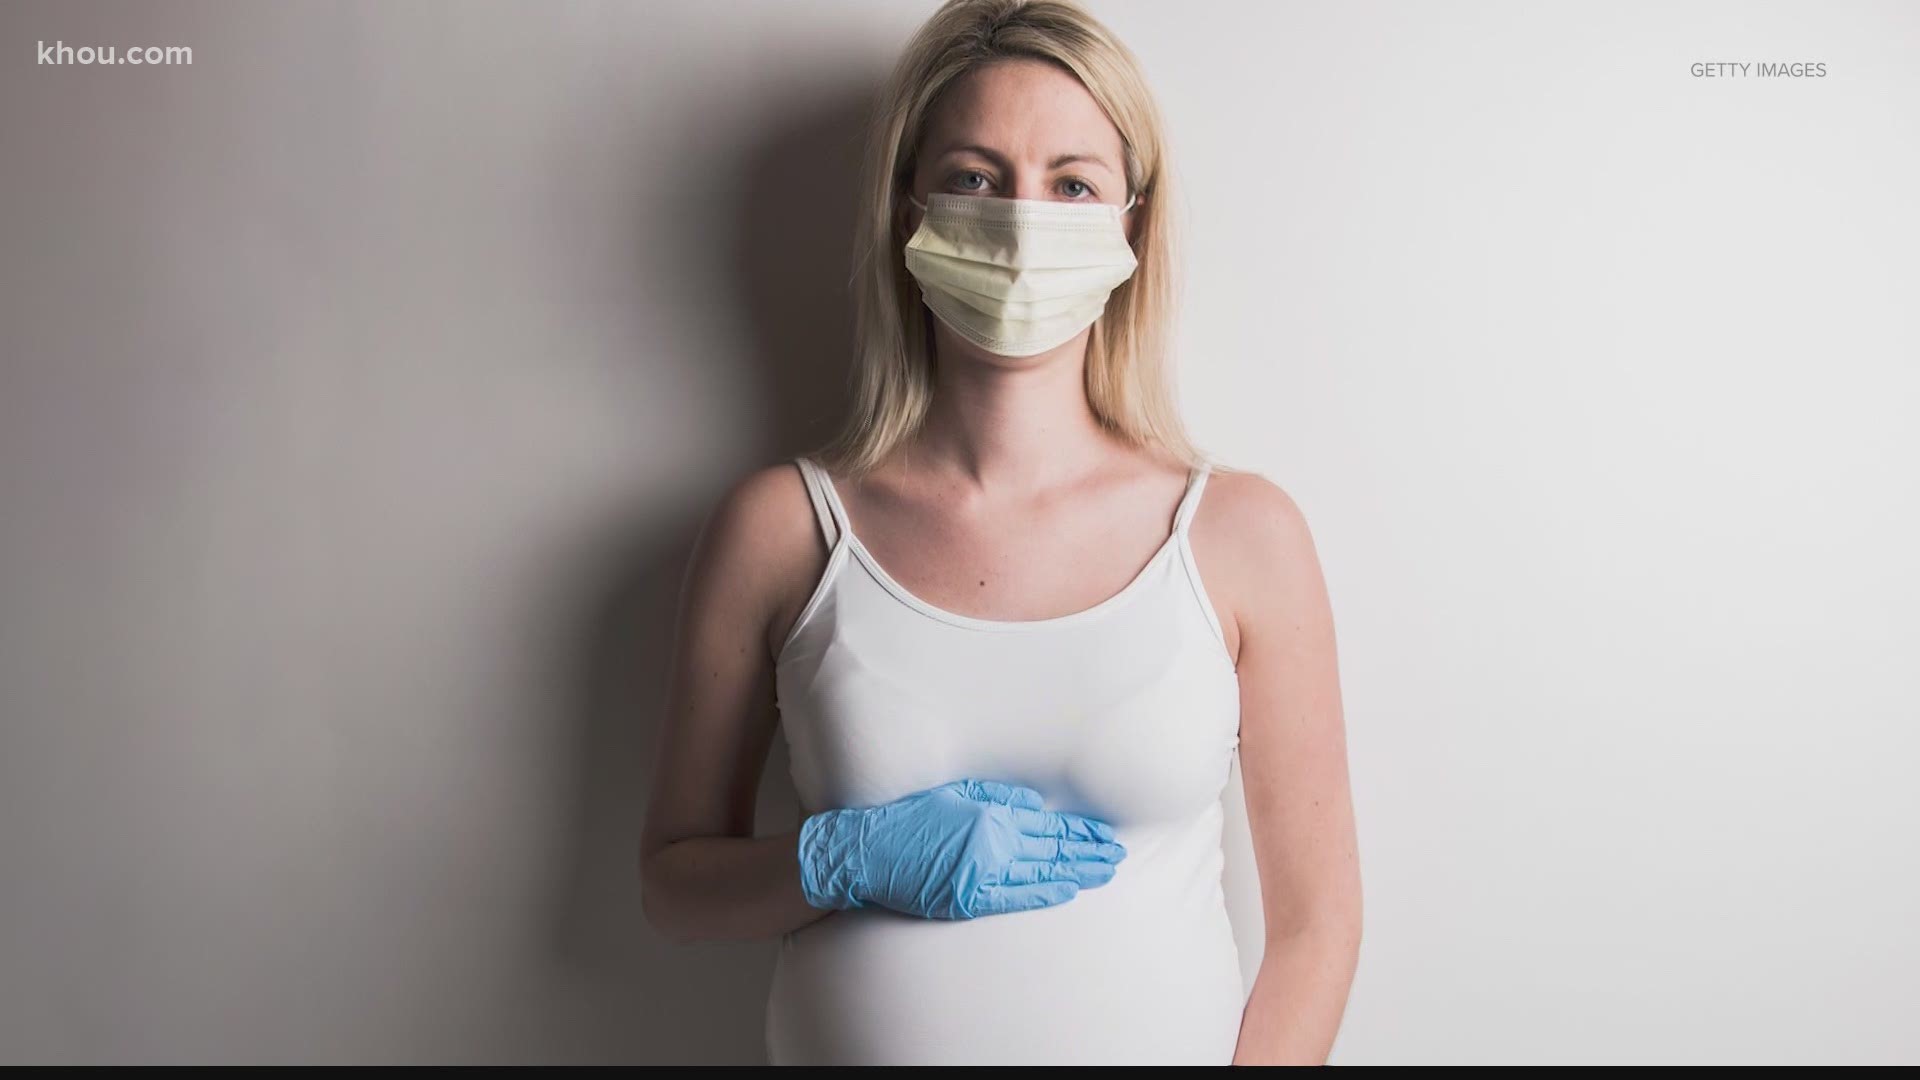 Pregnancy is typically a special time, full of excitement and anticipation. But the COVID-19 pandemic has left many expectant mothers feeling fearful and anxious.